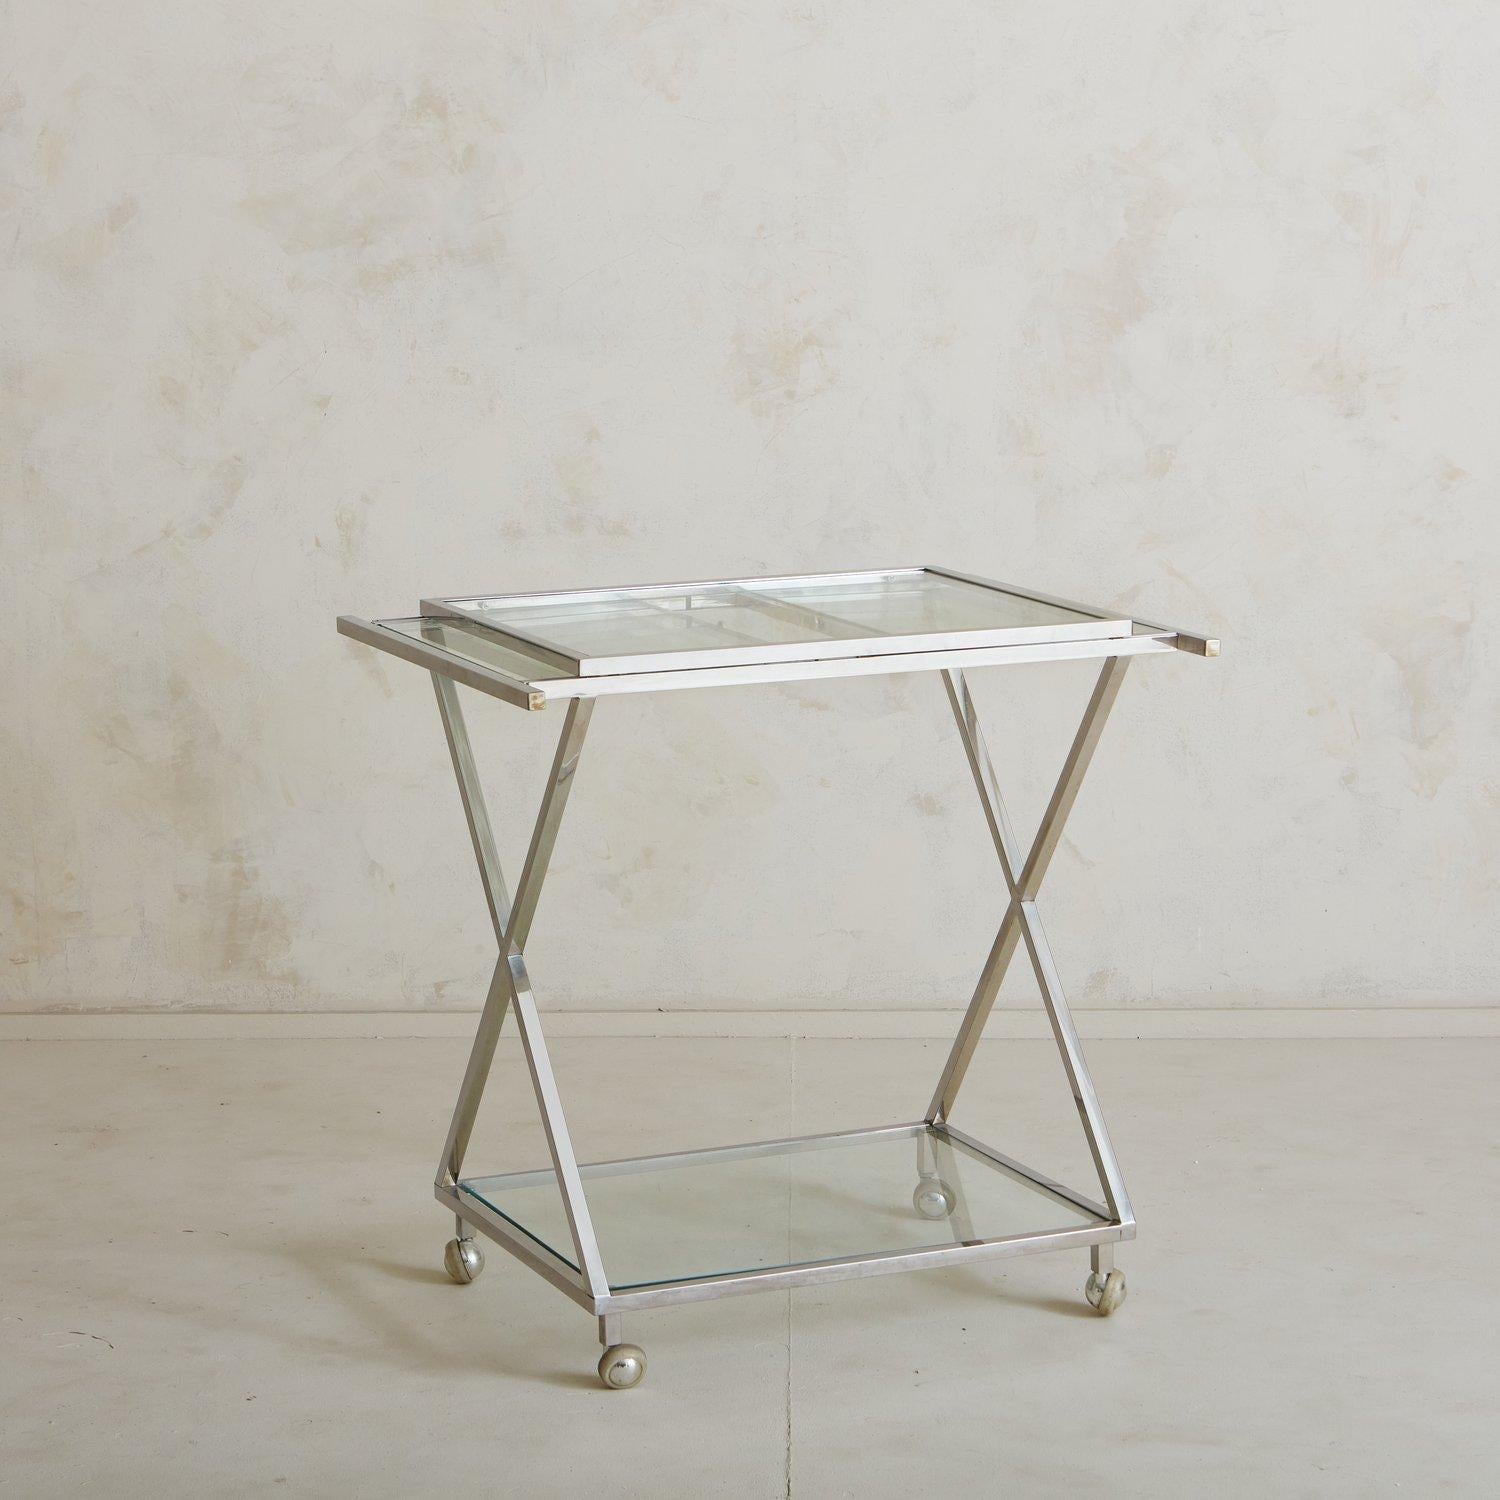 A vintage polished chrome two-tier bar cart featuring rectangular glass shelves and two extendable leaves. This piece has a sleek profile with X-detailing and stands on four casters for easy mobility. USA, 1960s.

 Measures: 31.5